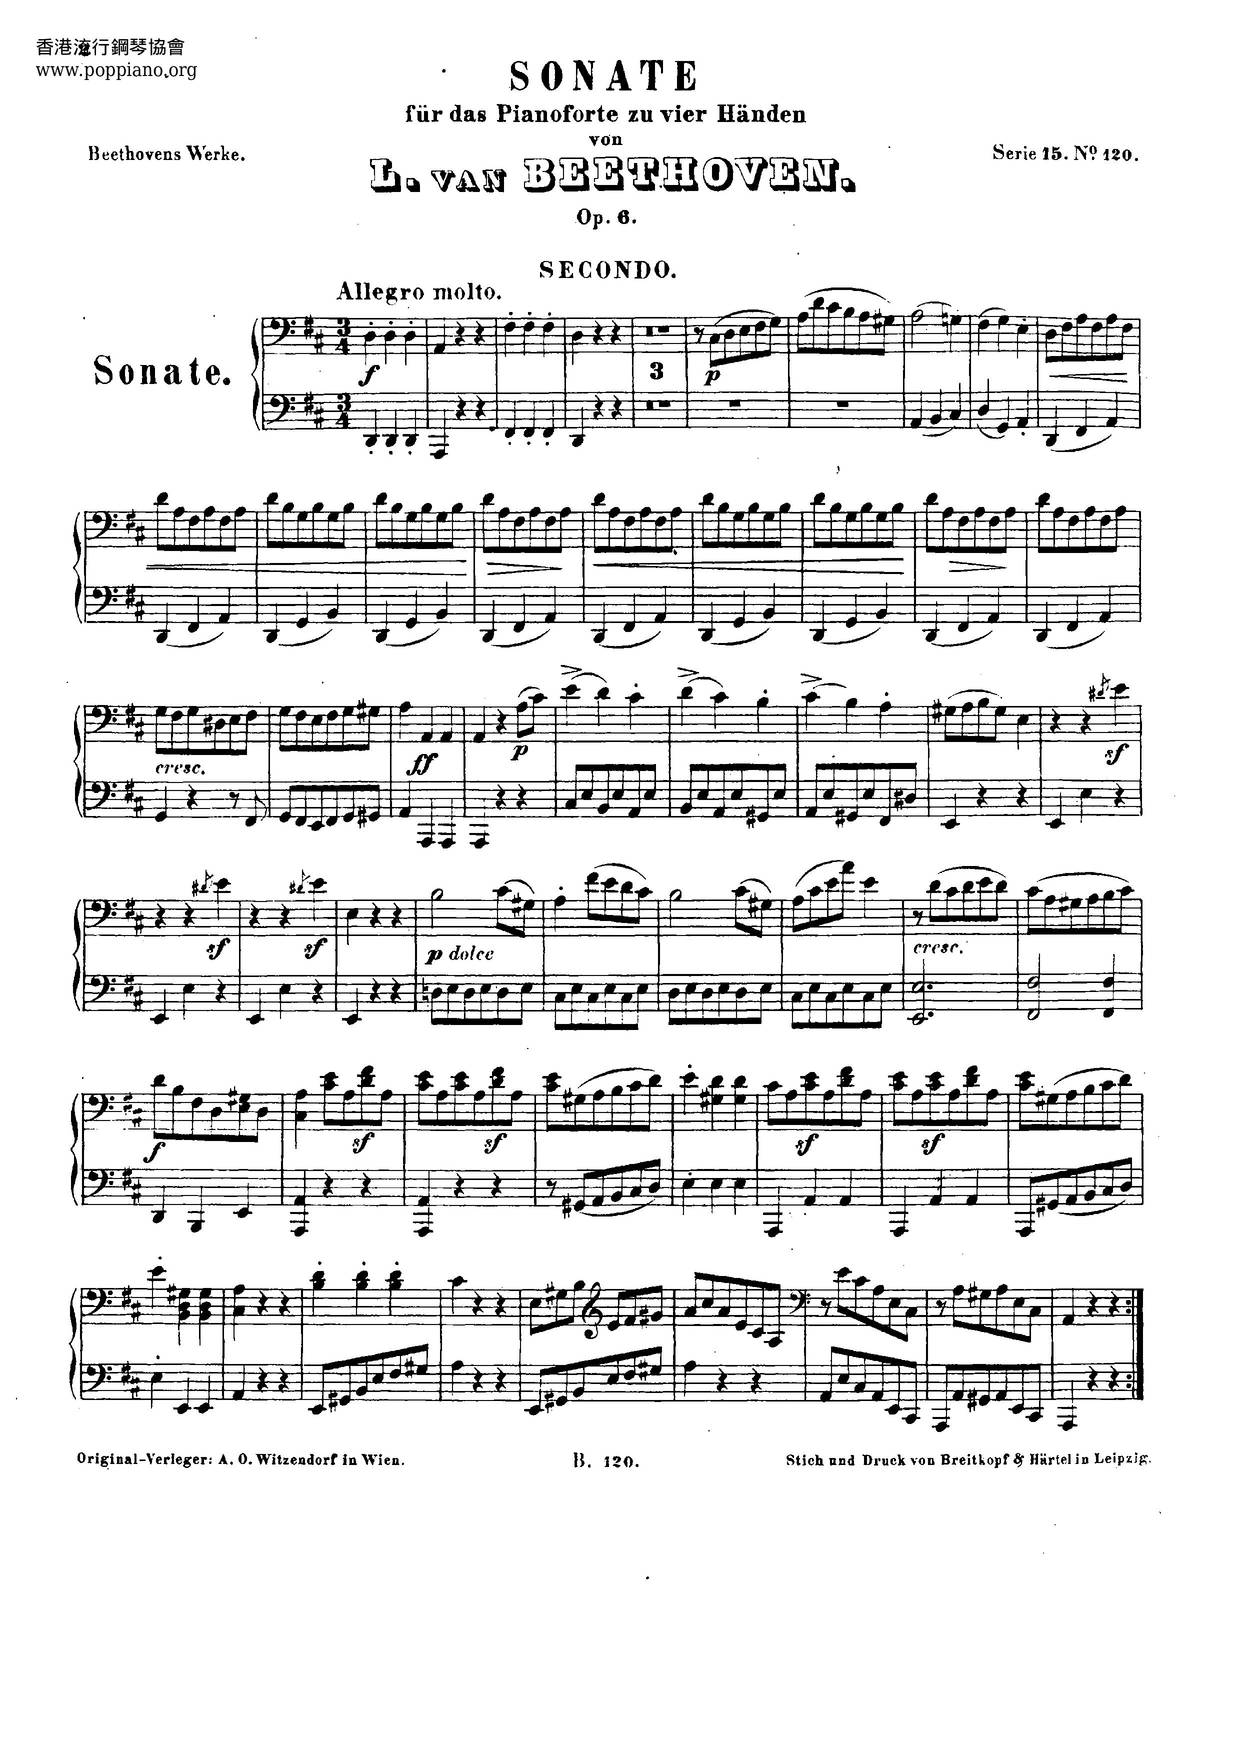 Sonata For Piano Four Hands In D Major, Op. 6 Score